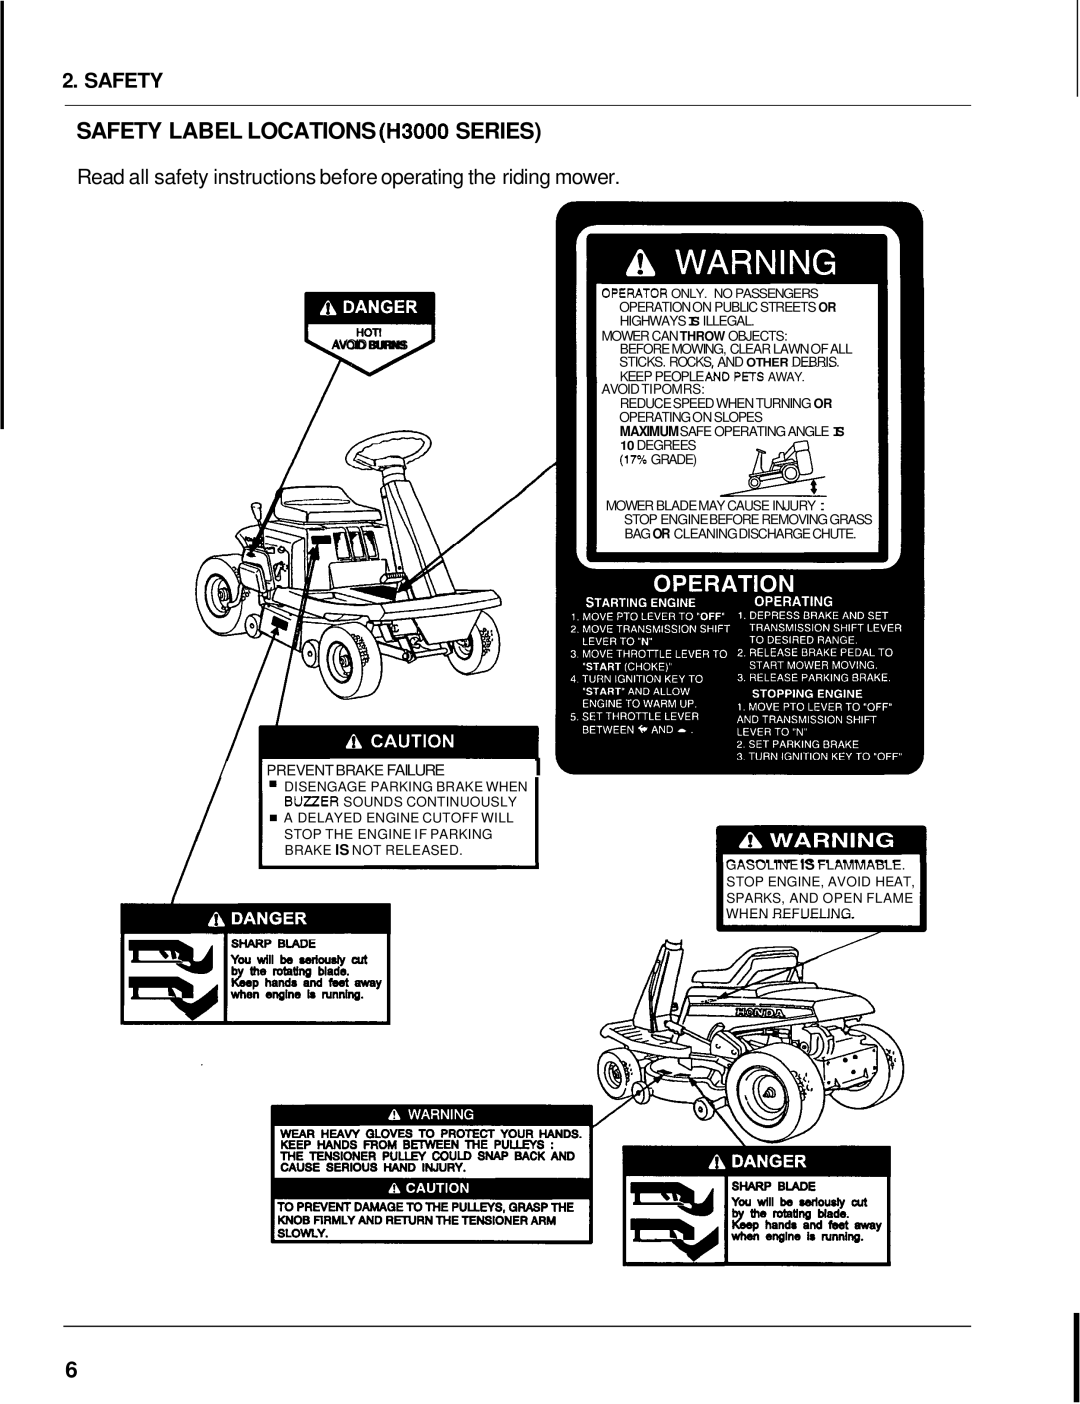 Honda Power Equipment H1000 manual SAFETY LABEL LOCATIONS H3000 SERIES, Safety, I/ Iprevent Brake Failurei 